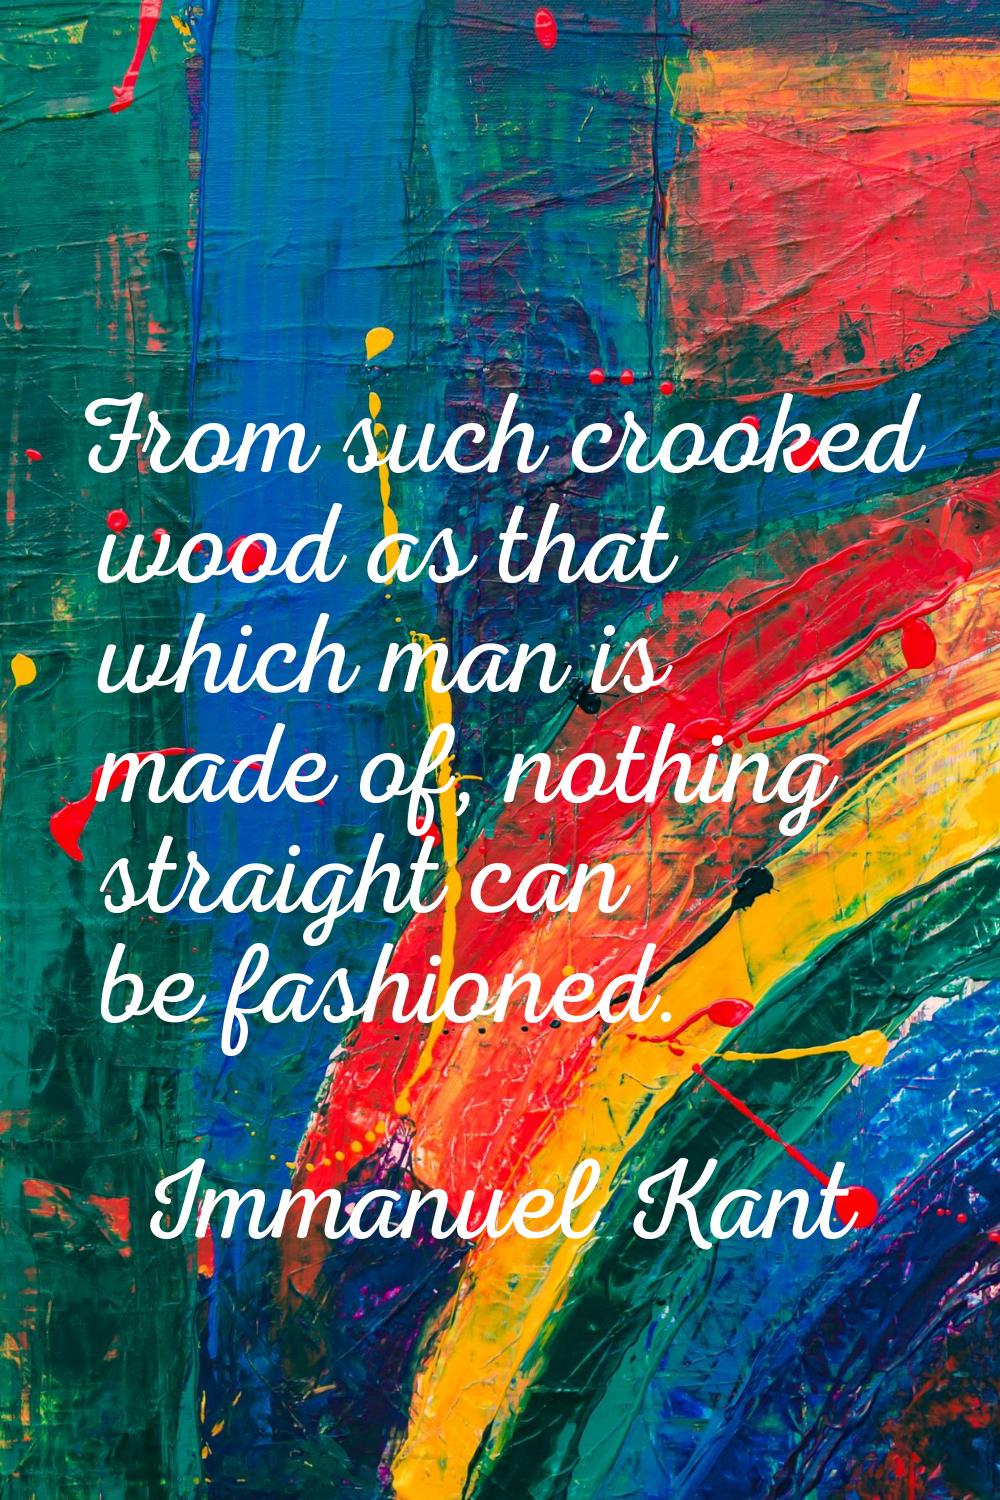 From such crooked wood as that which man is made of, nothing straight can be fashioned.